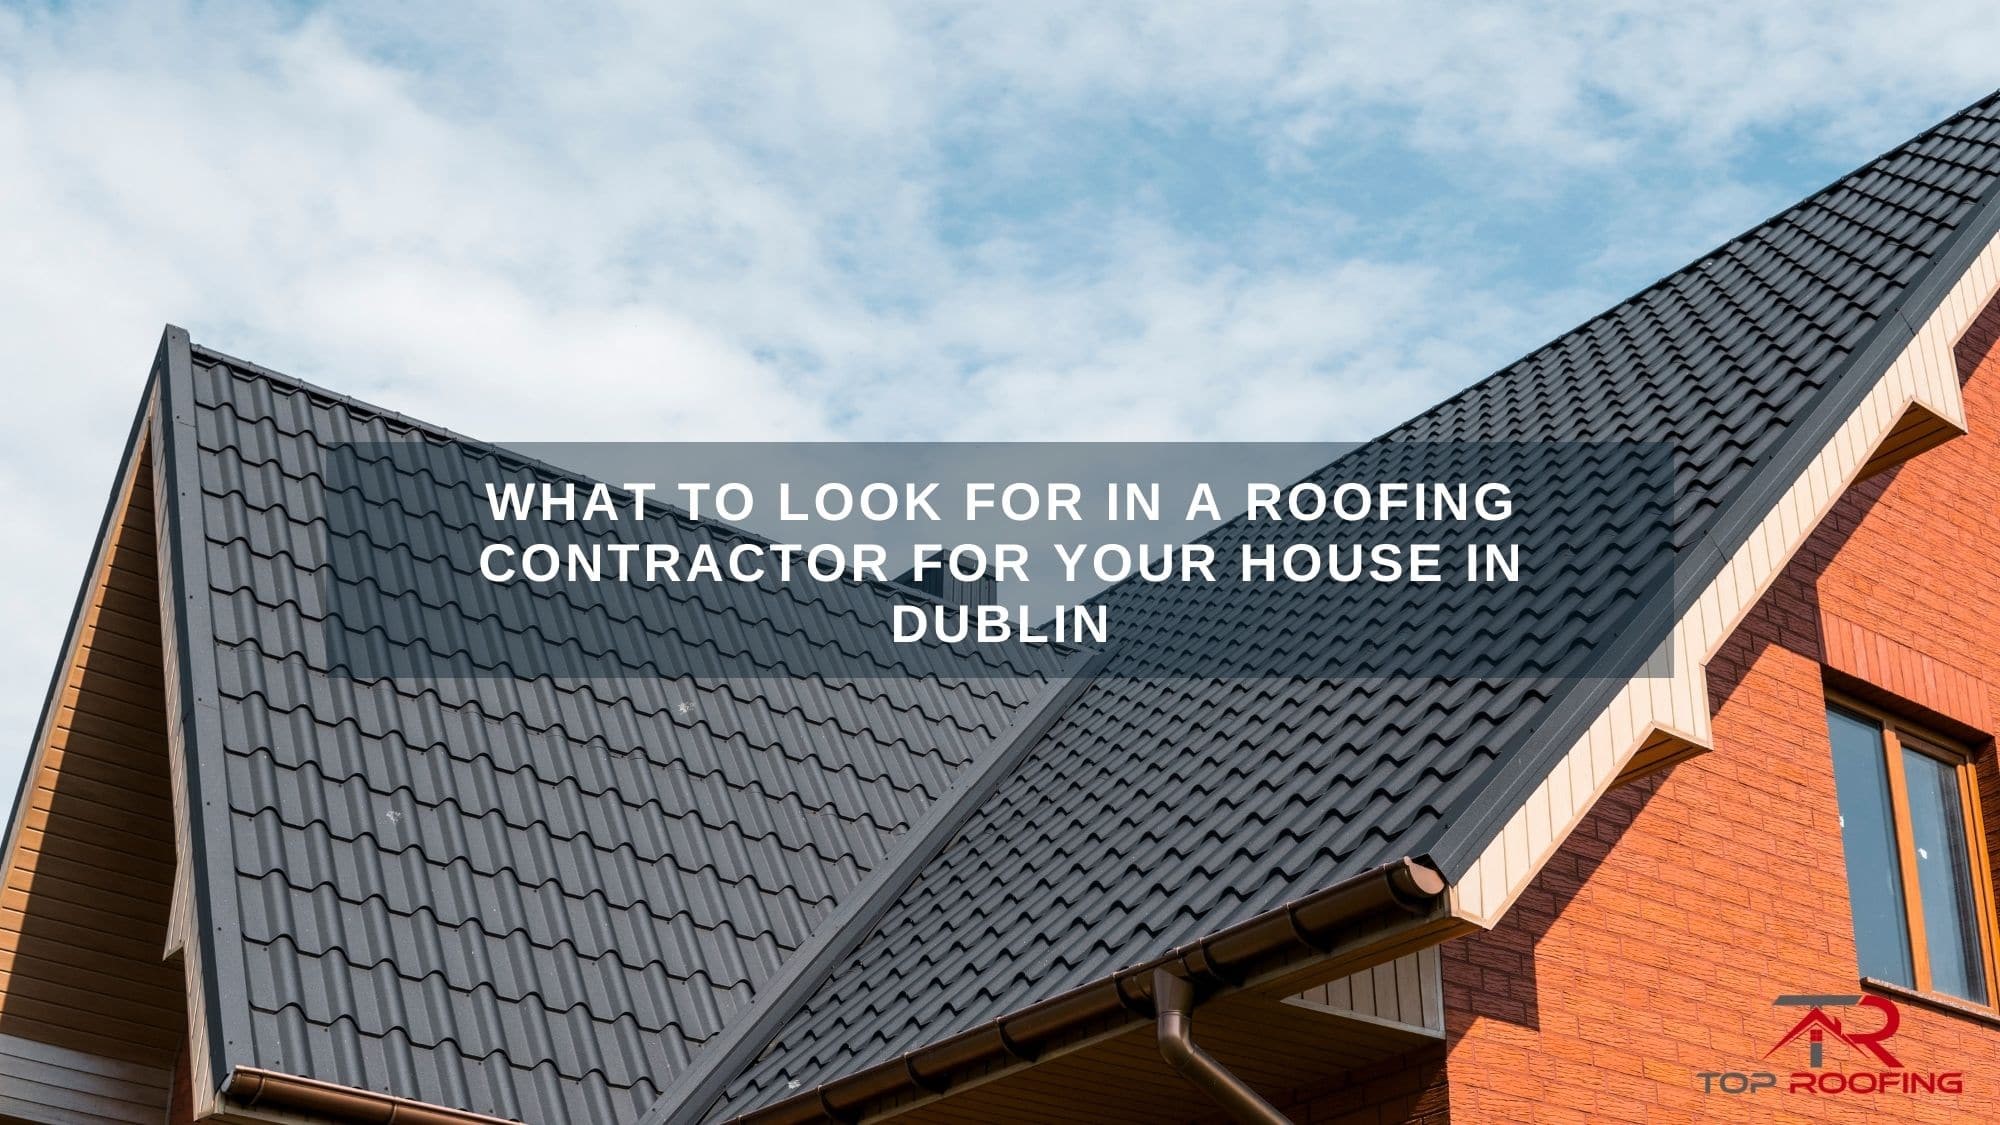 What to Look for in a Roofing Contractor for Your House in Dublin